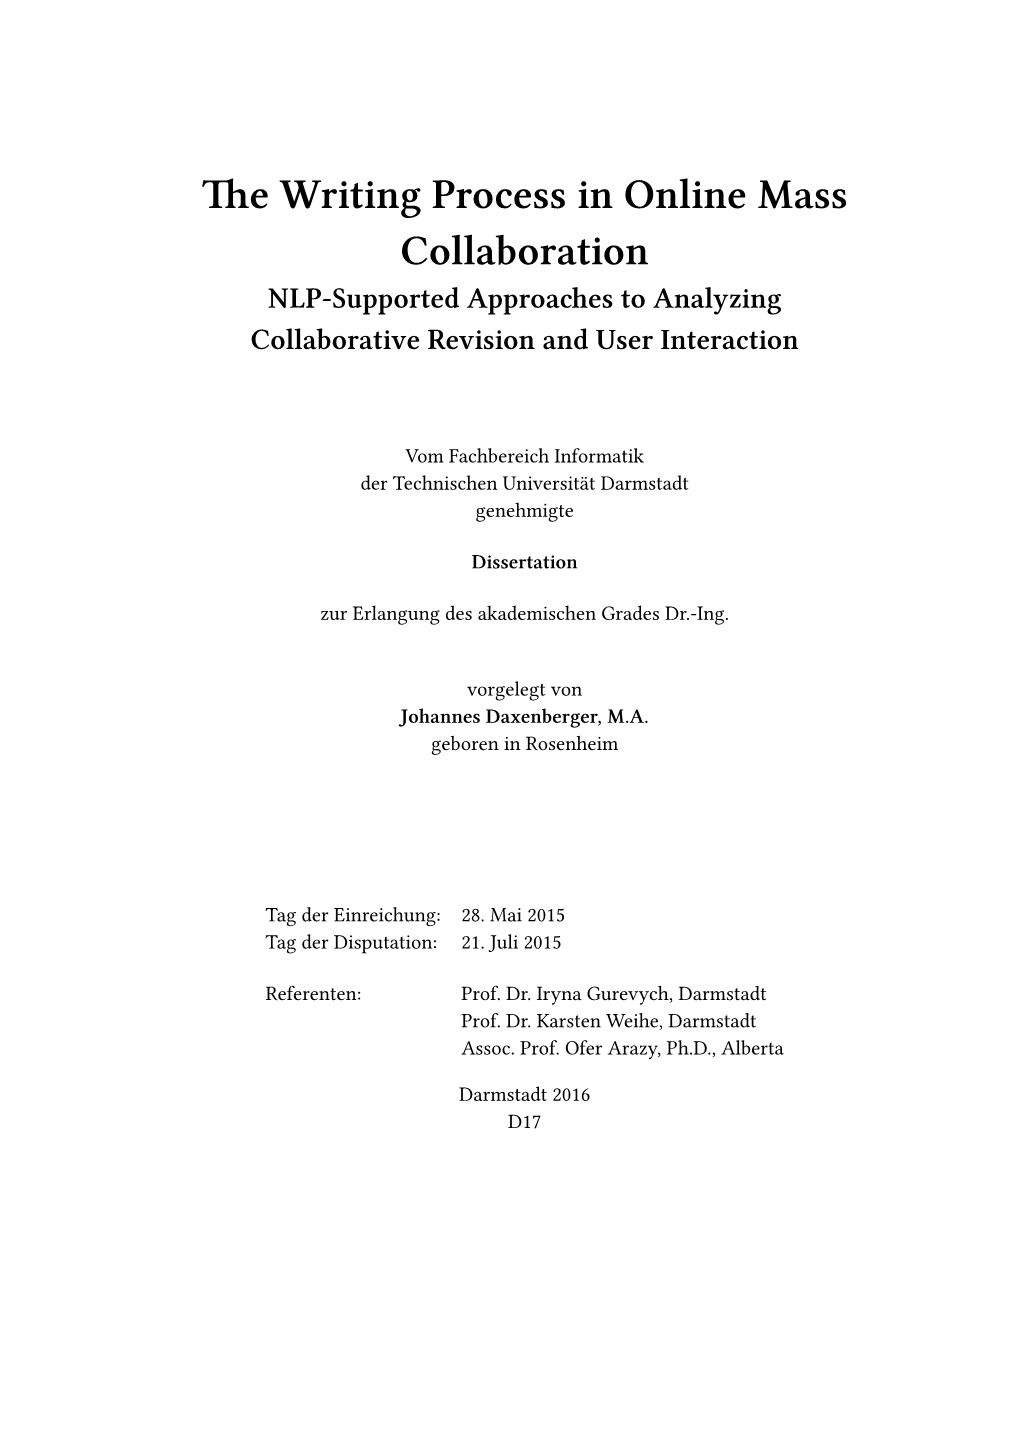 The Writing Process in Online Mass Collaboration NLP-Supported Approaches to Analyzing Collaborative Revision and User Interaction